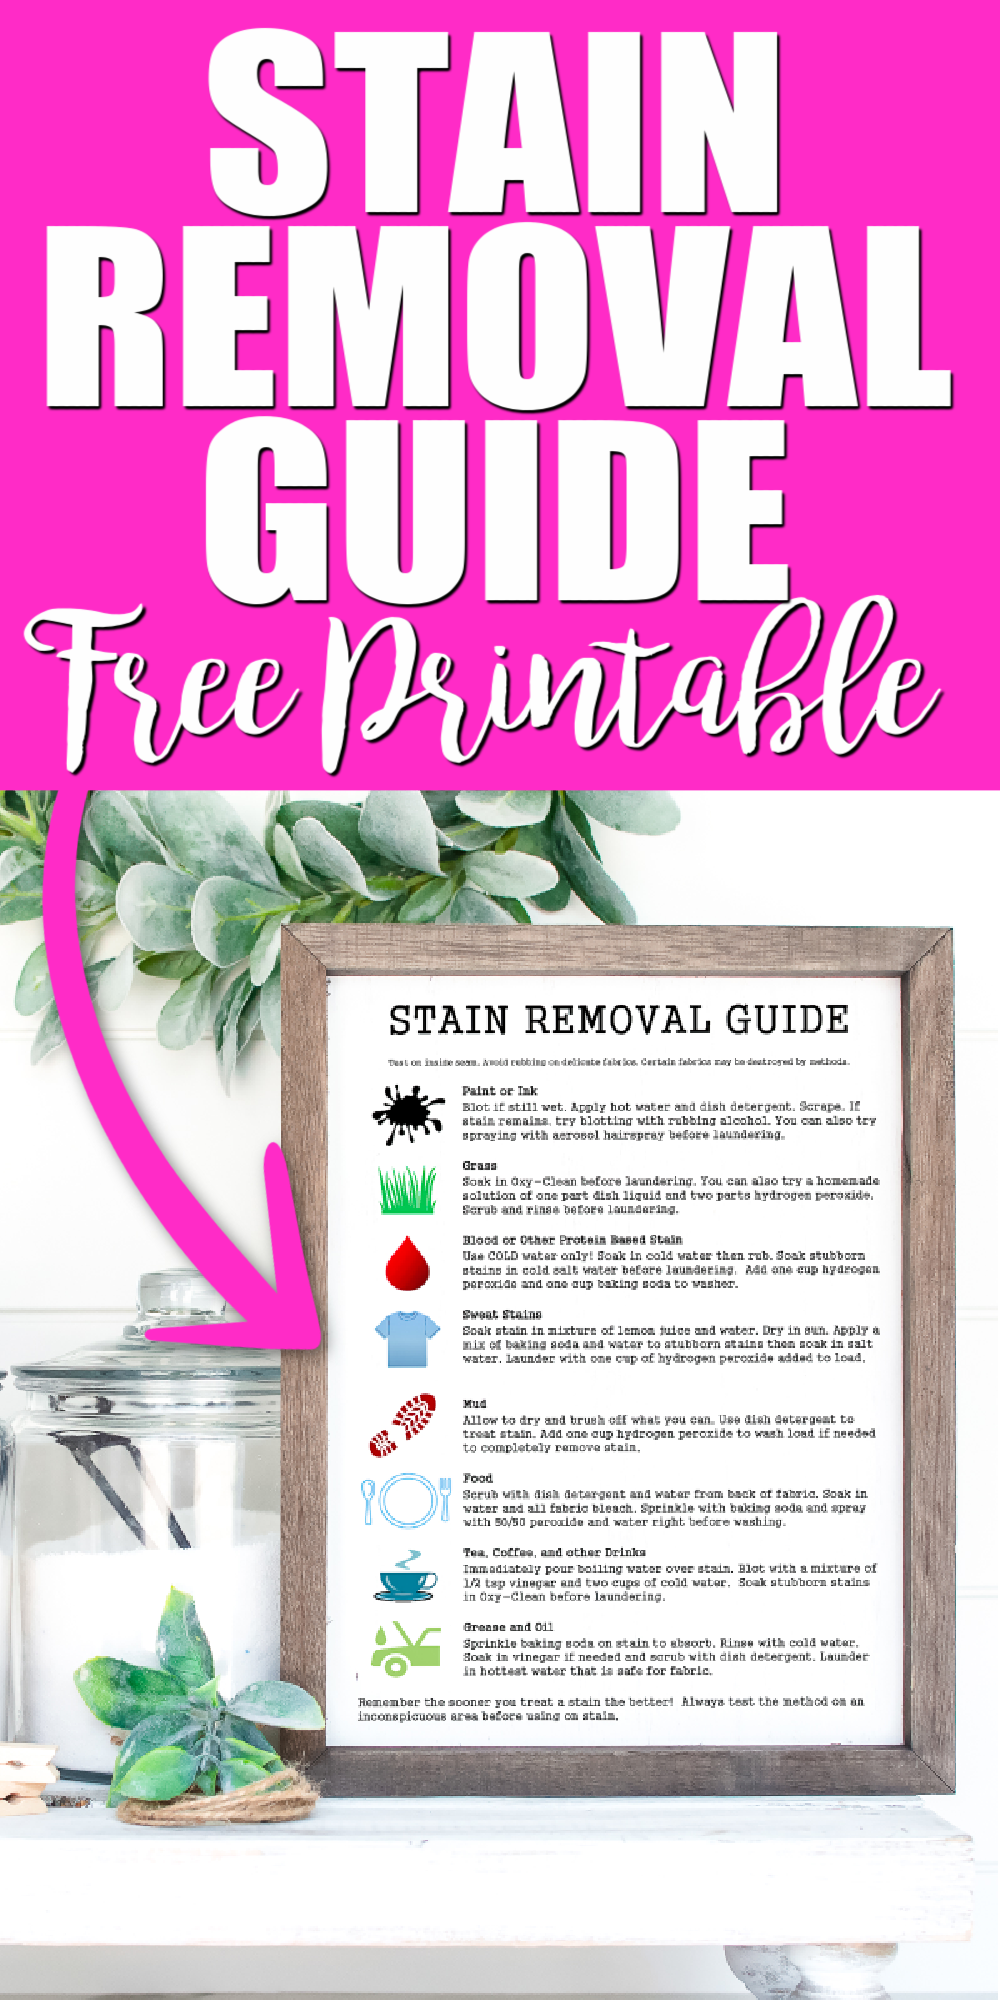 Stain Removal Guide Free Printable for Your Home - Angie Holden The ...